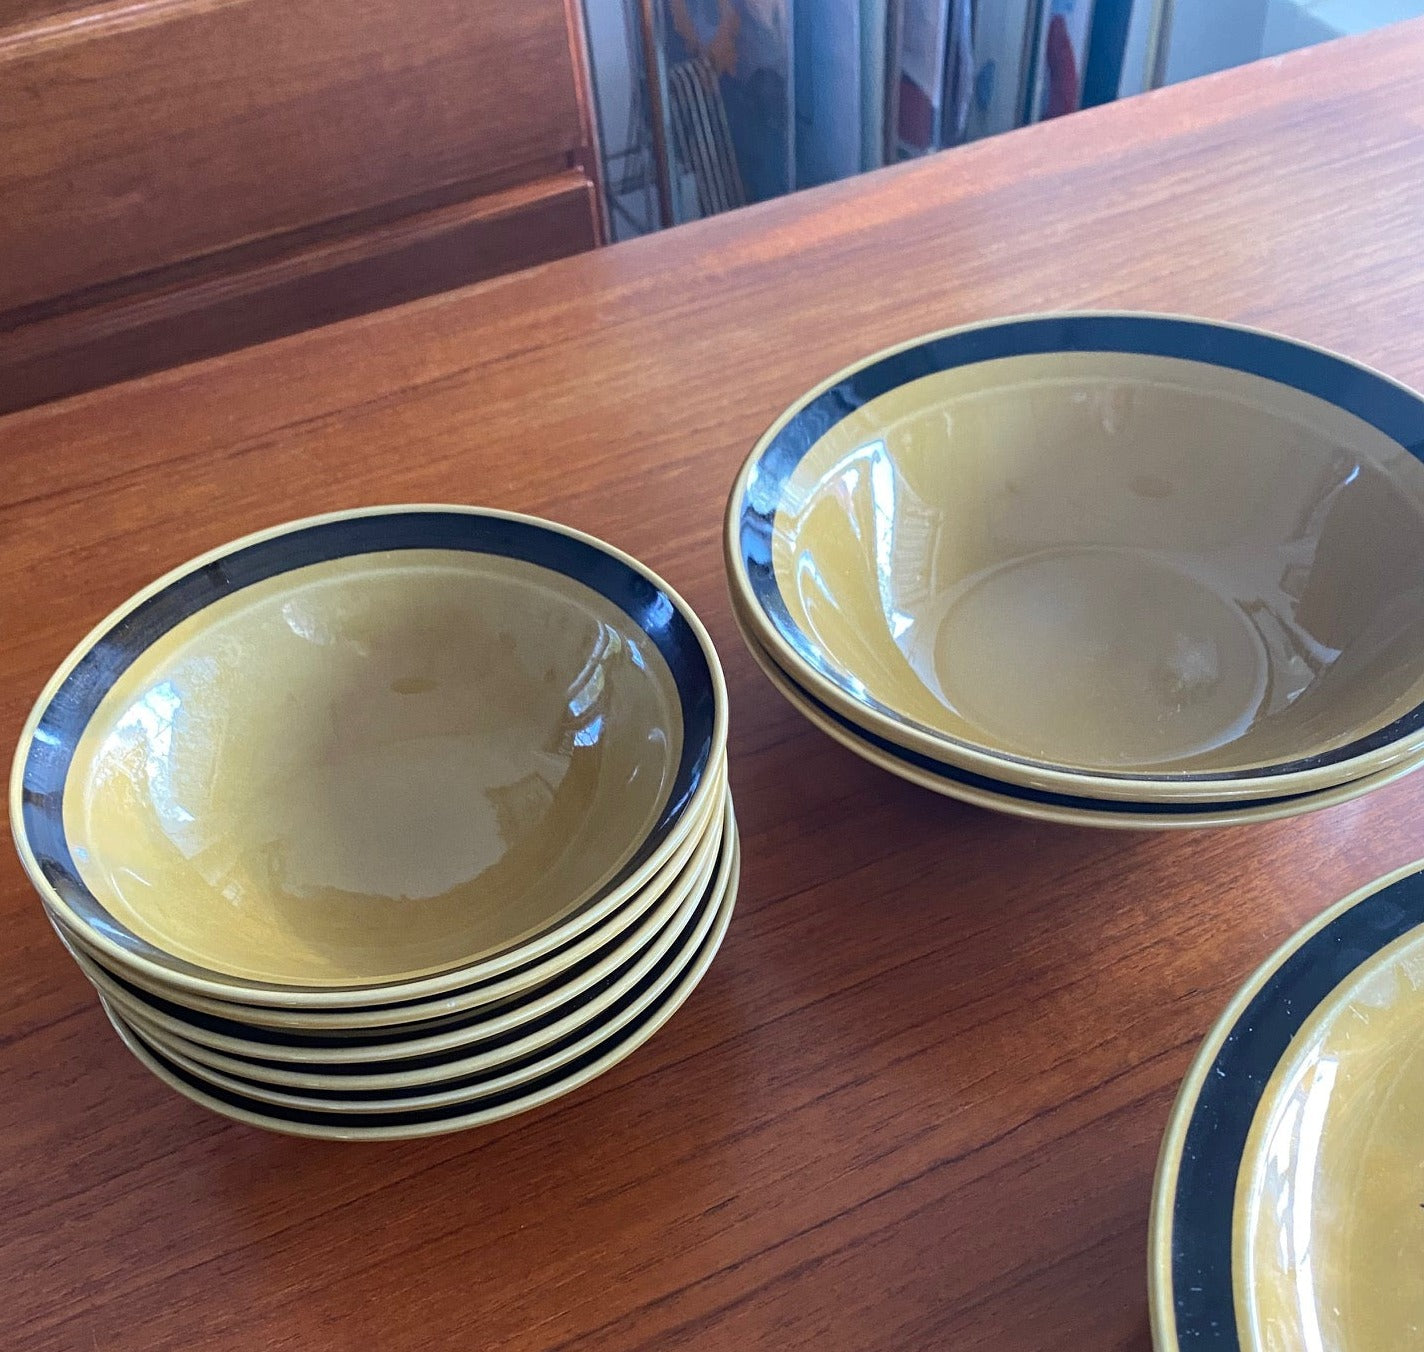 Set of Stoneware Cereal and Serving Bowls